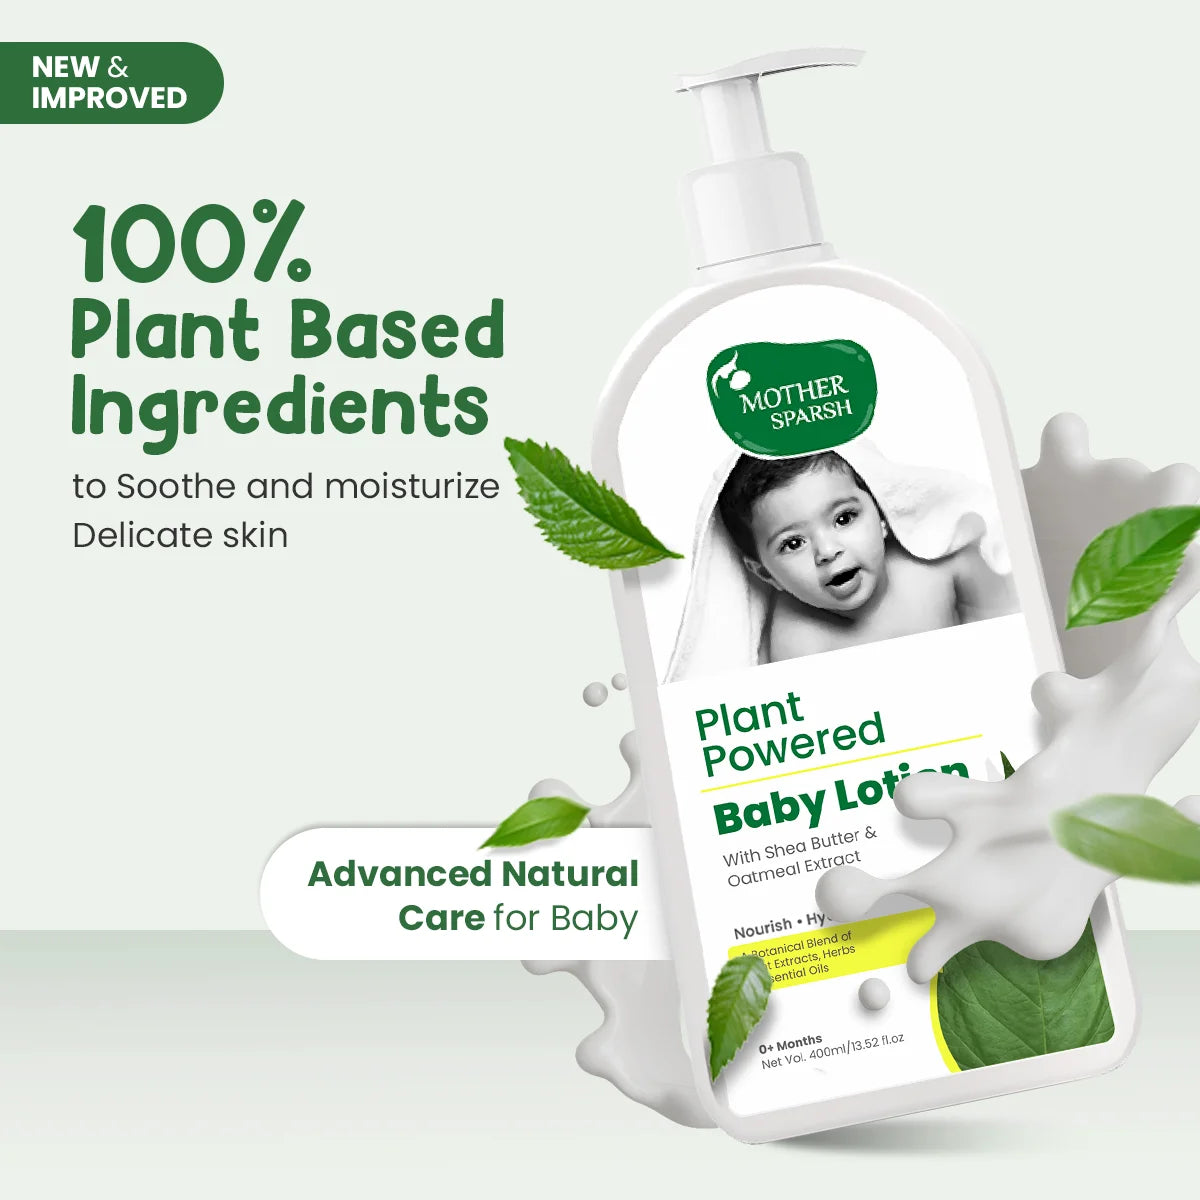 Natural Baby lotion made with plant-based ingredients in Super Saver Pack